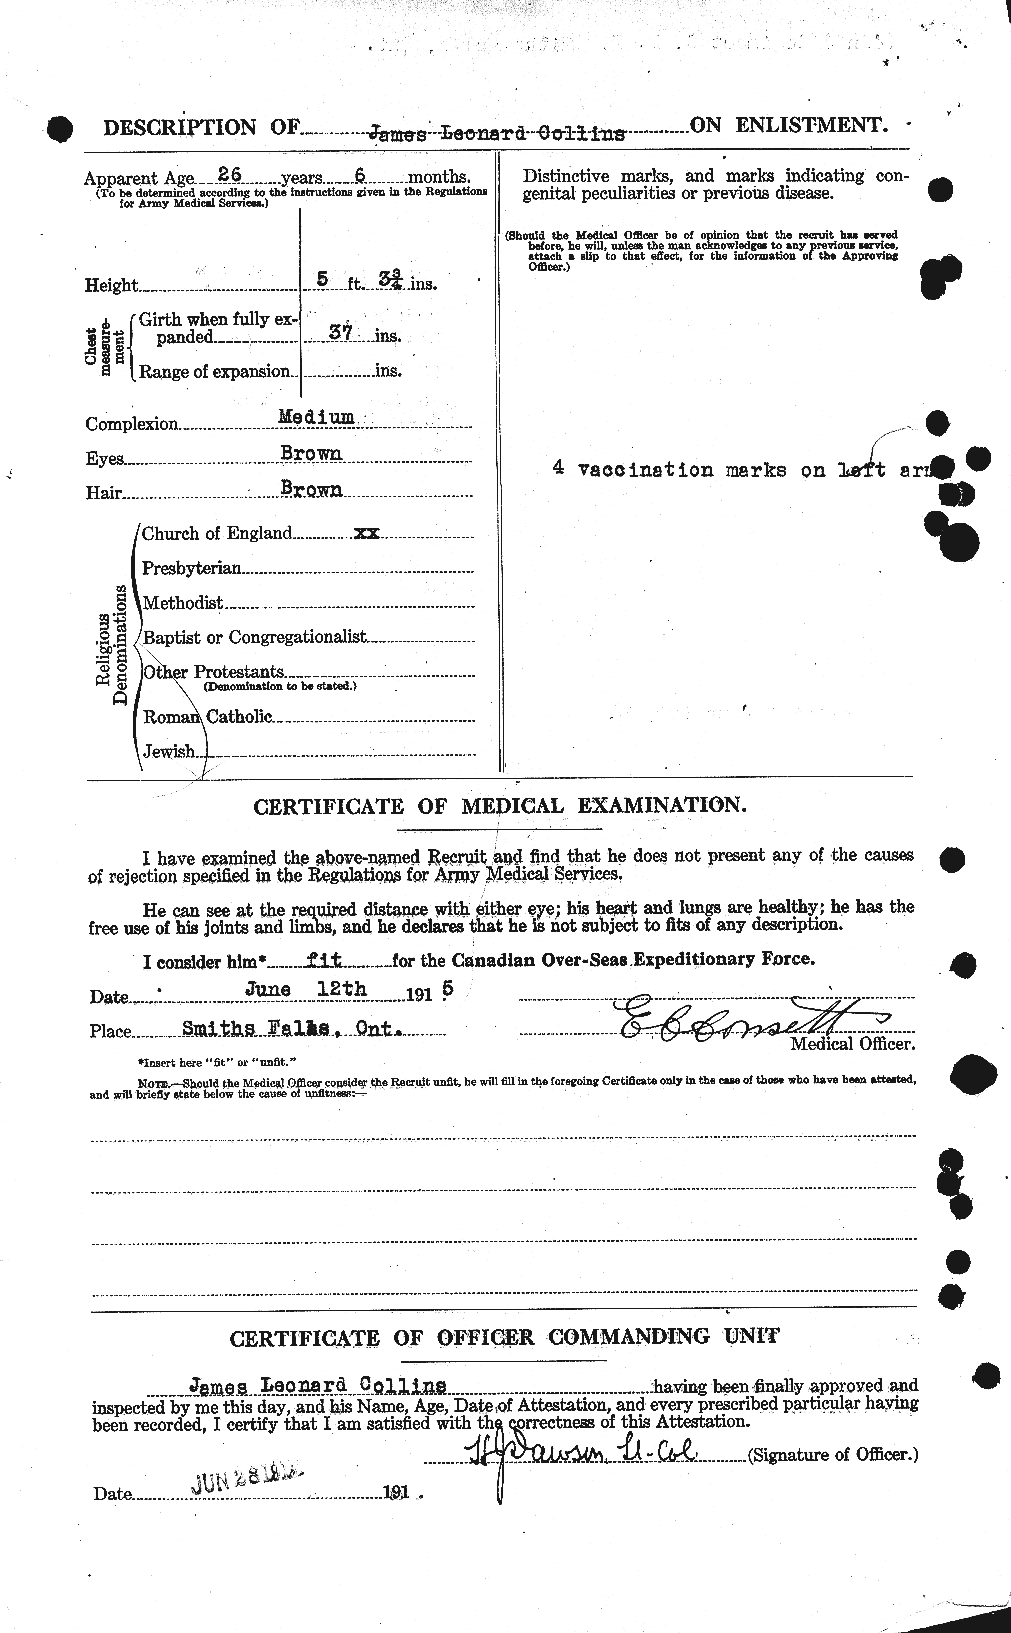 Personnel Records of the First World War - CEF 069945b